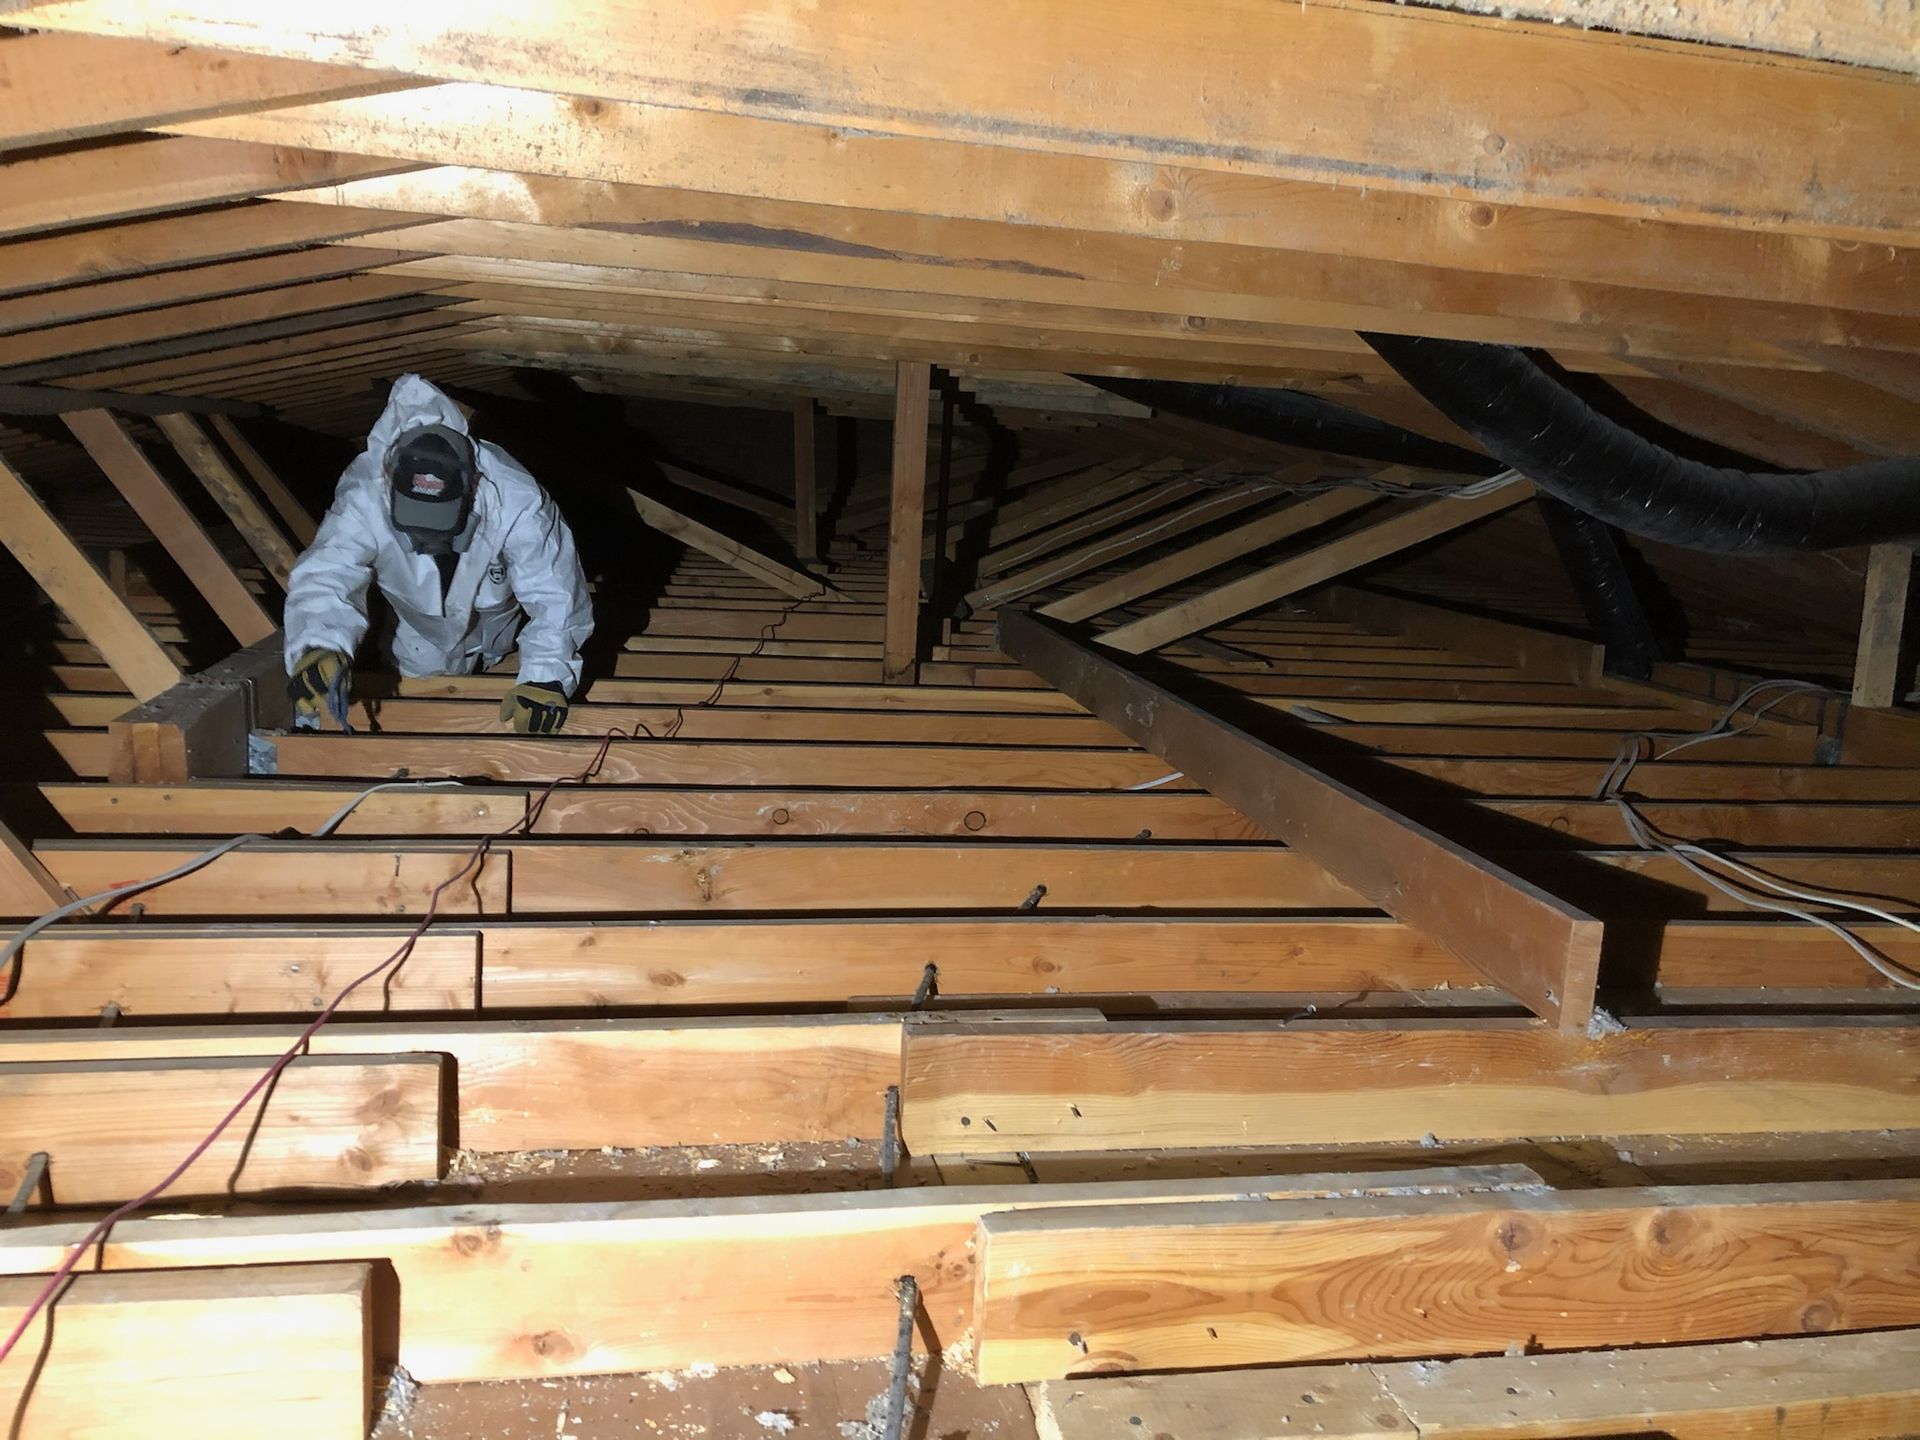 A man is standing in the attic of a house.